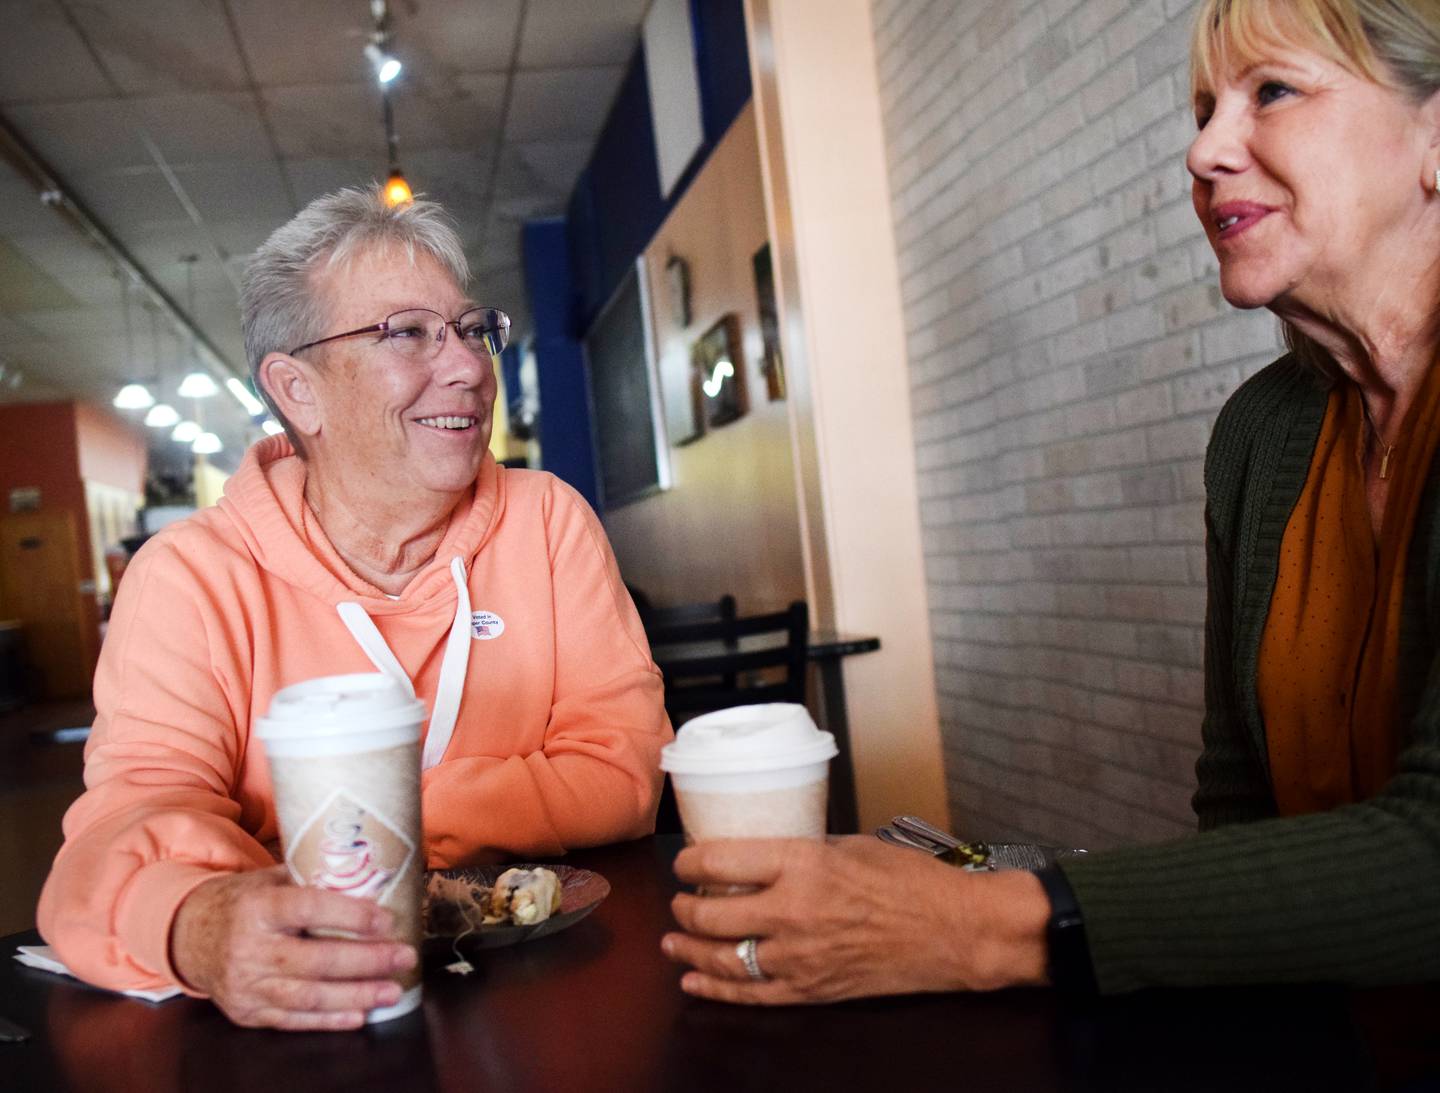 Bev Price, a Democratic candidate running for a seat on the Jasper County Board of Supervisors, drinks tea with friend Pat Wallace inside Uncle Nancy's Coffee House on Nov. 8 in Newton.